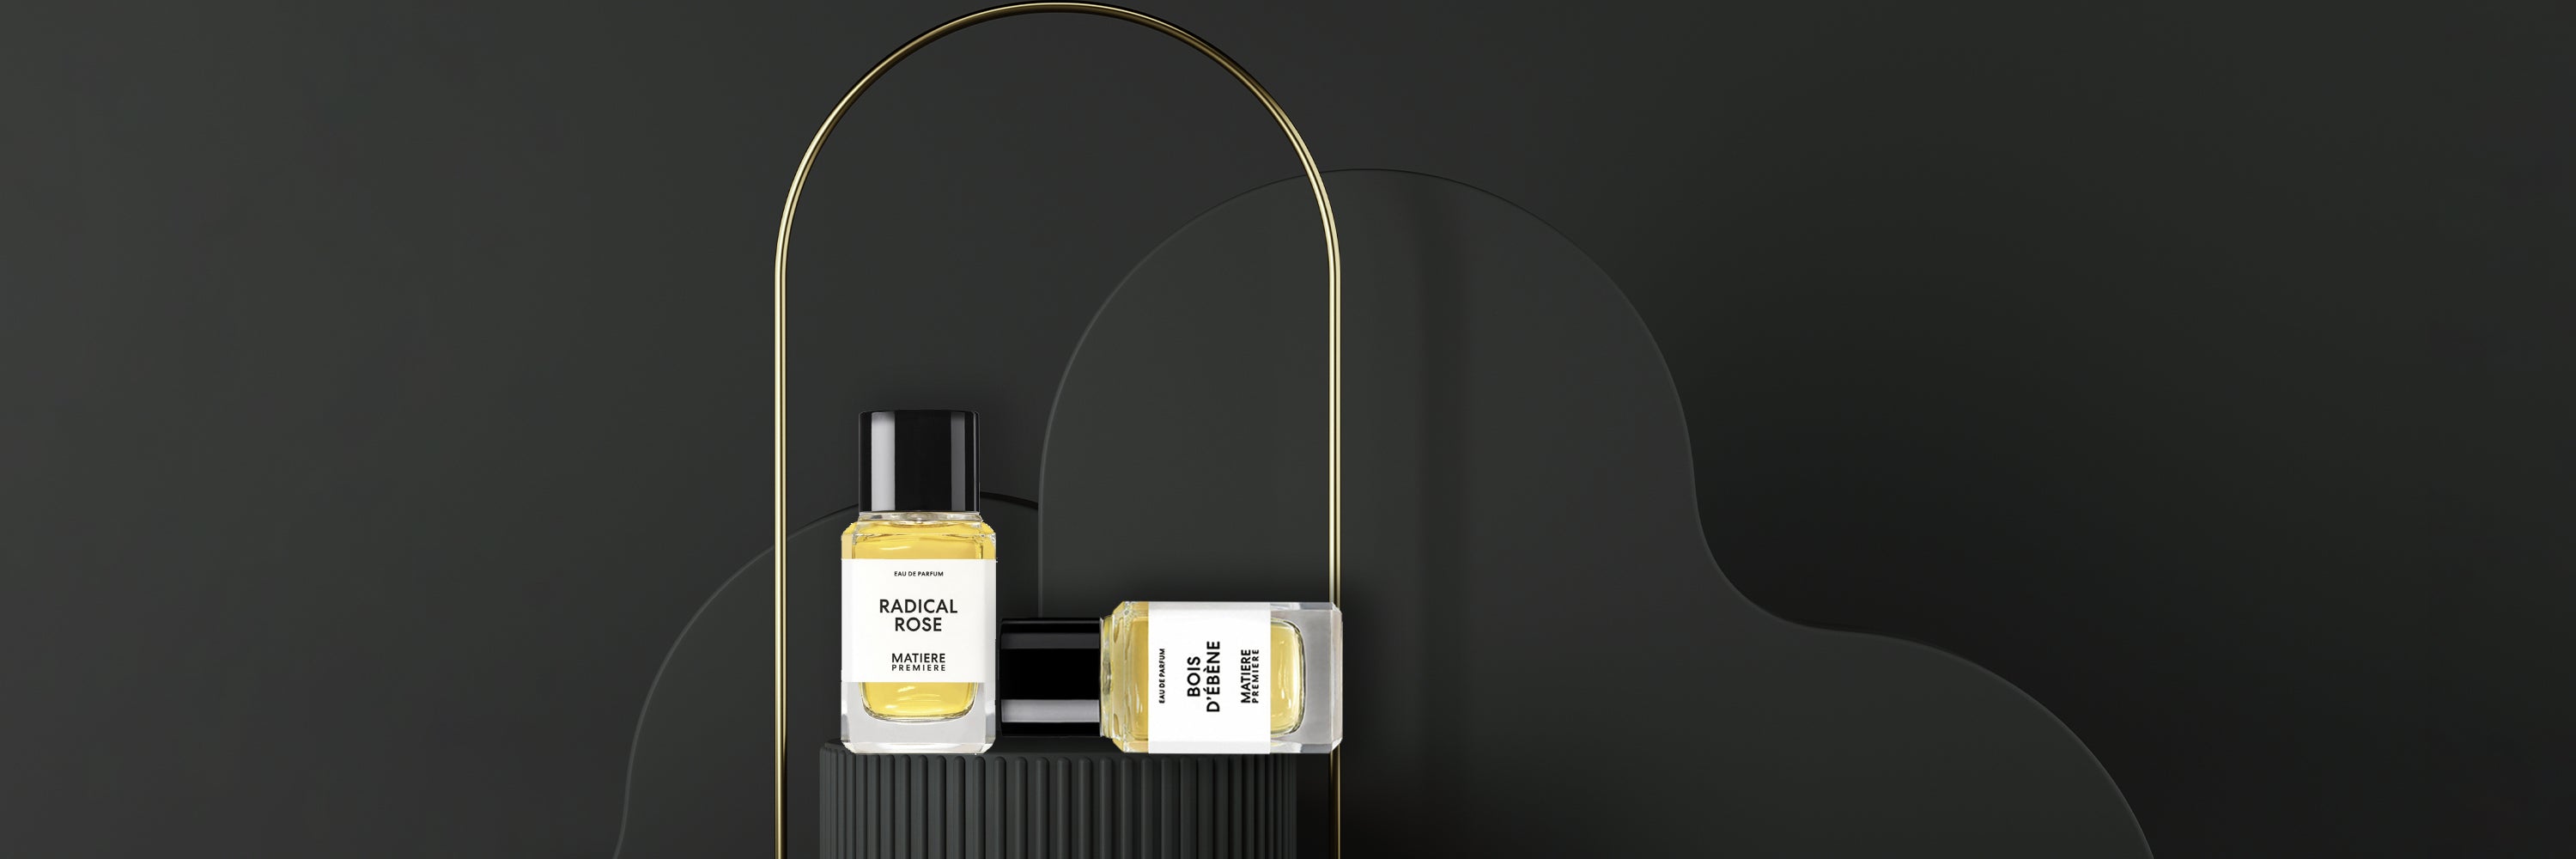 Matiere Premiere collection at Aedes Perfumery